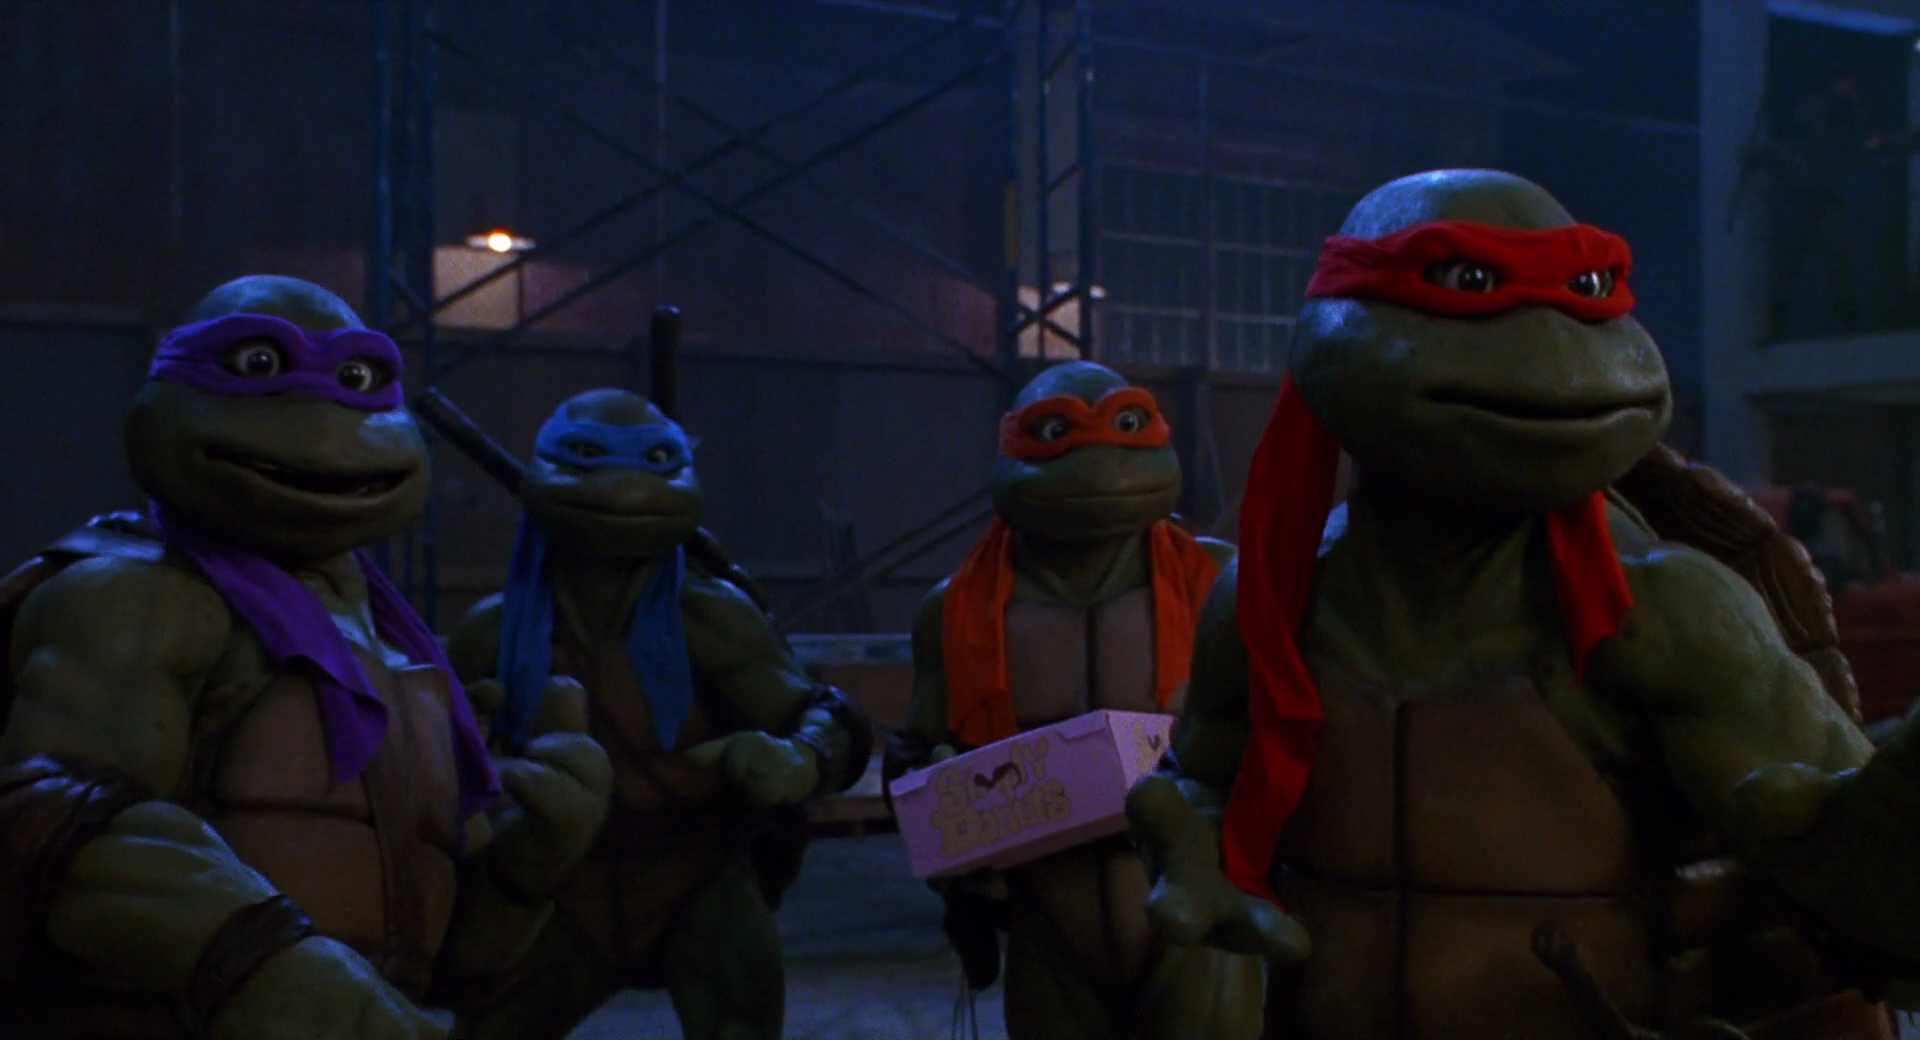 What to wear to the ninja turtle movie if you don't have ninja